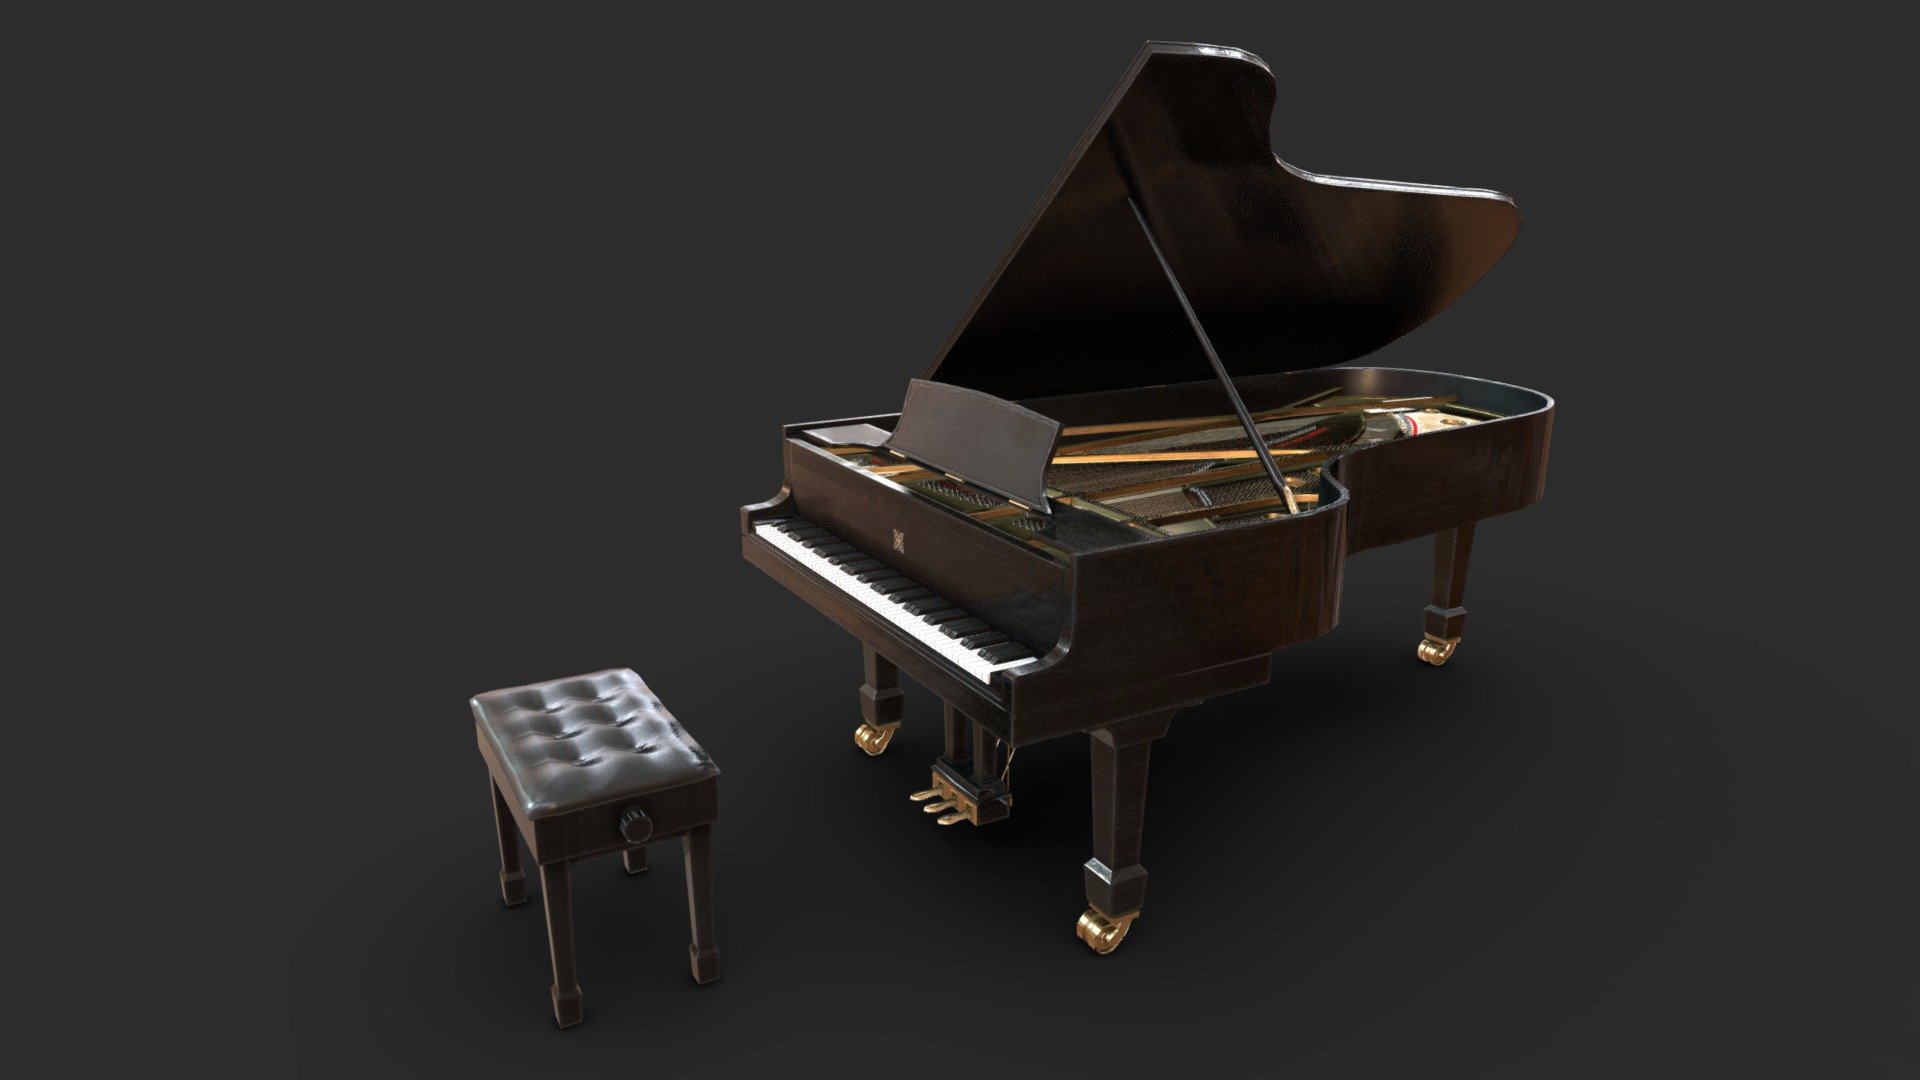 A portfolio piece I've been working on, a grand piano. I tried to make it as low poly as possible while maintaining nice curves and many internal parts 3d model